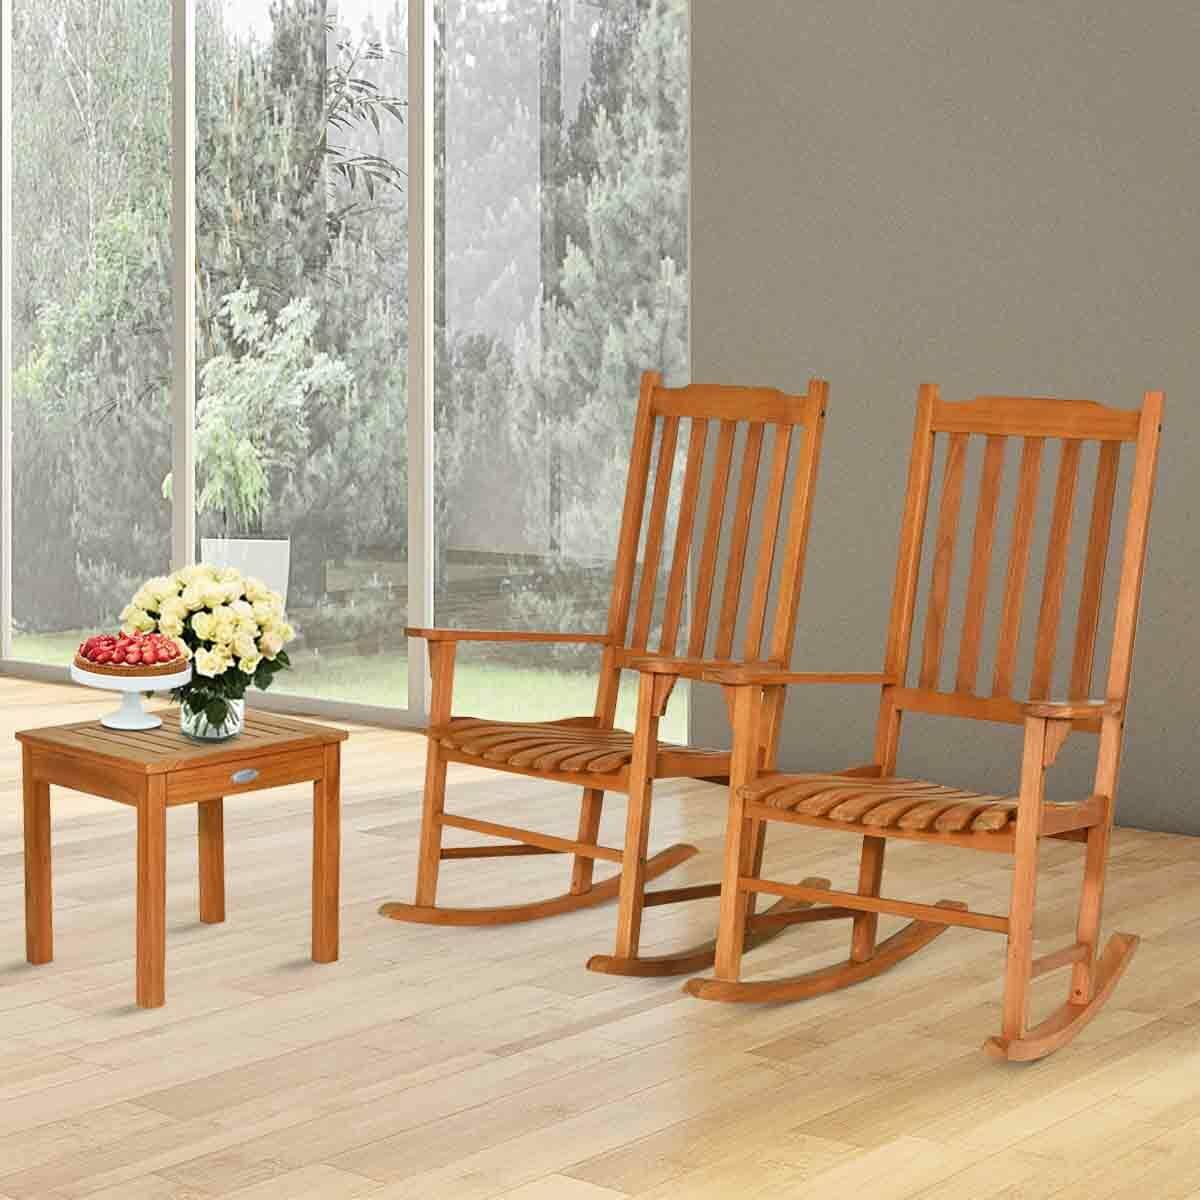 Gymax 3 PCS Eucalyptus Rocking Chair Set W/ Coffee Table 2 Wood Conversation Chairs - image 3 of 9